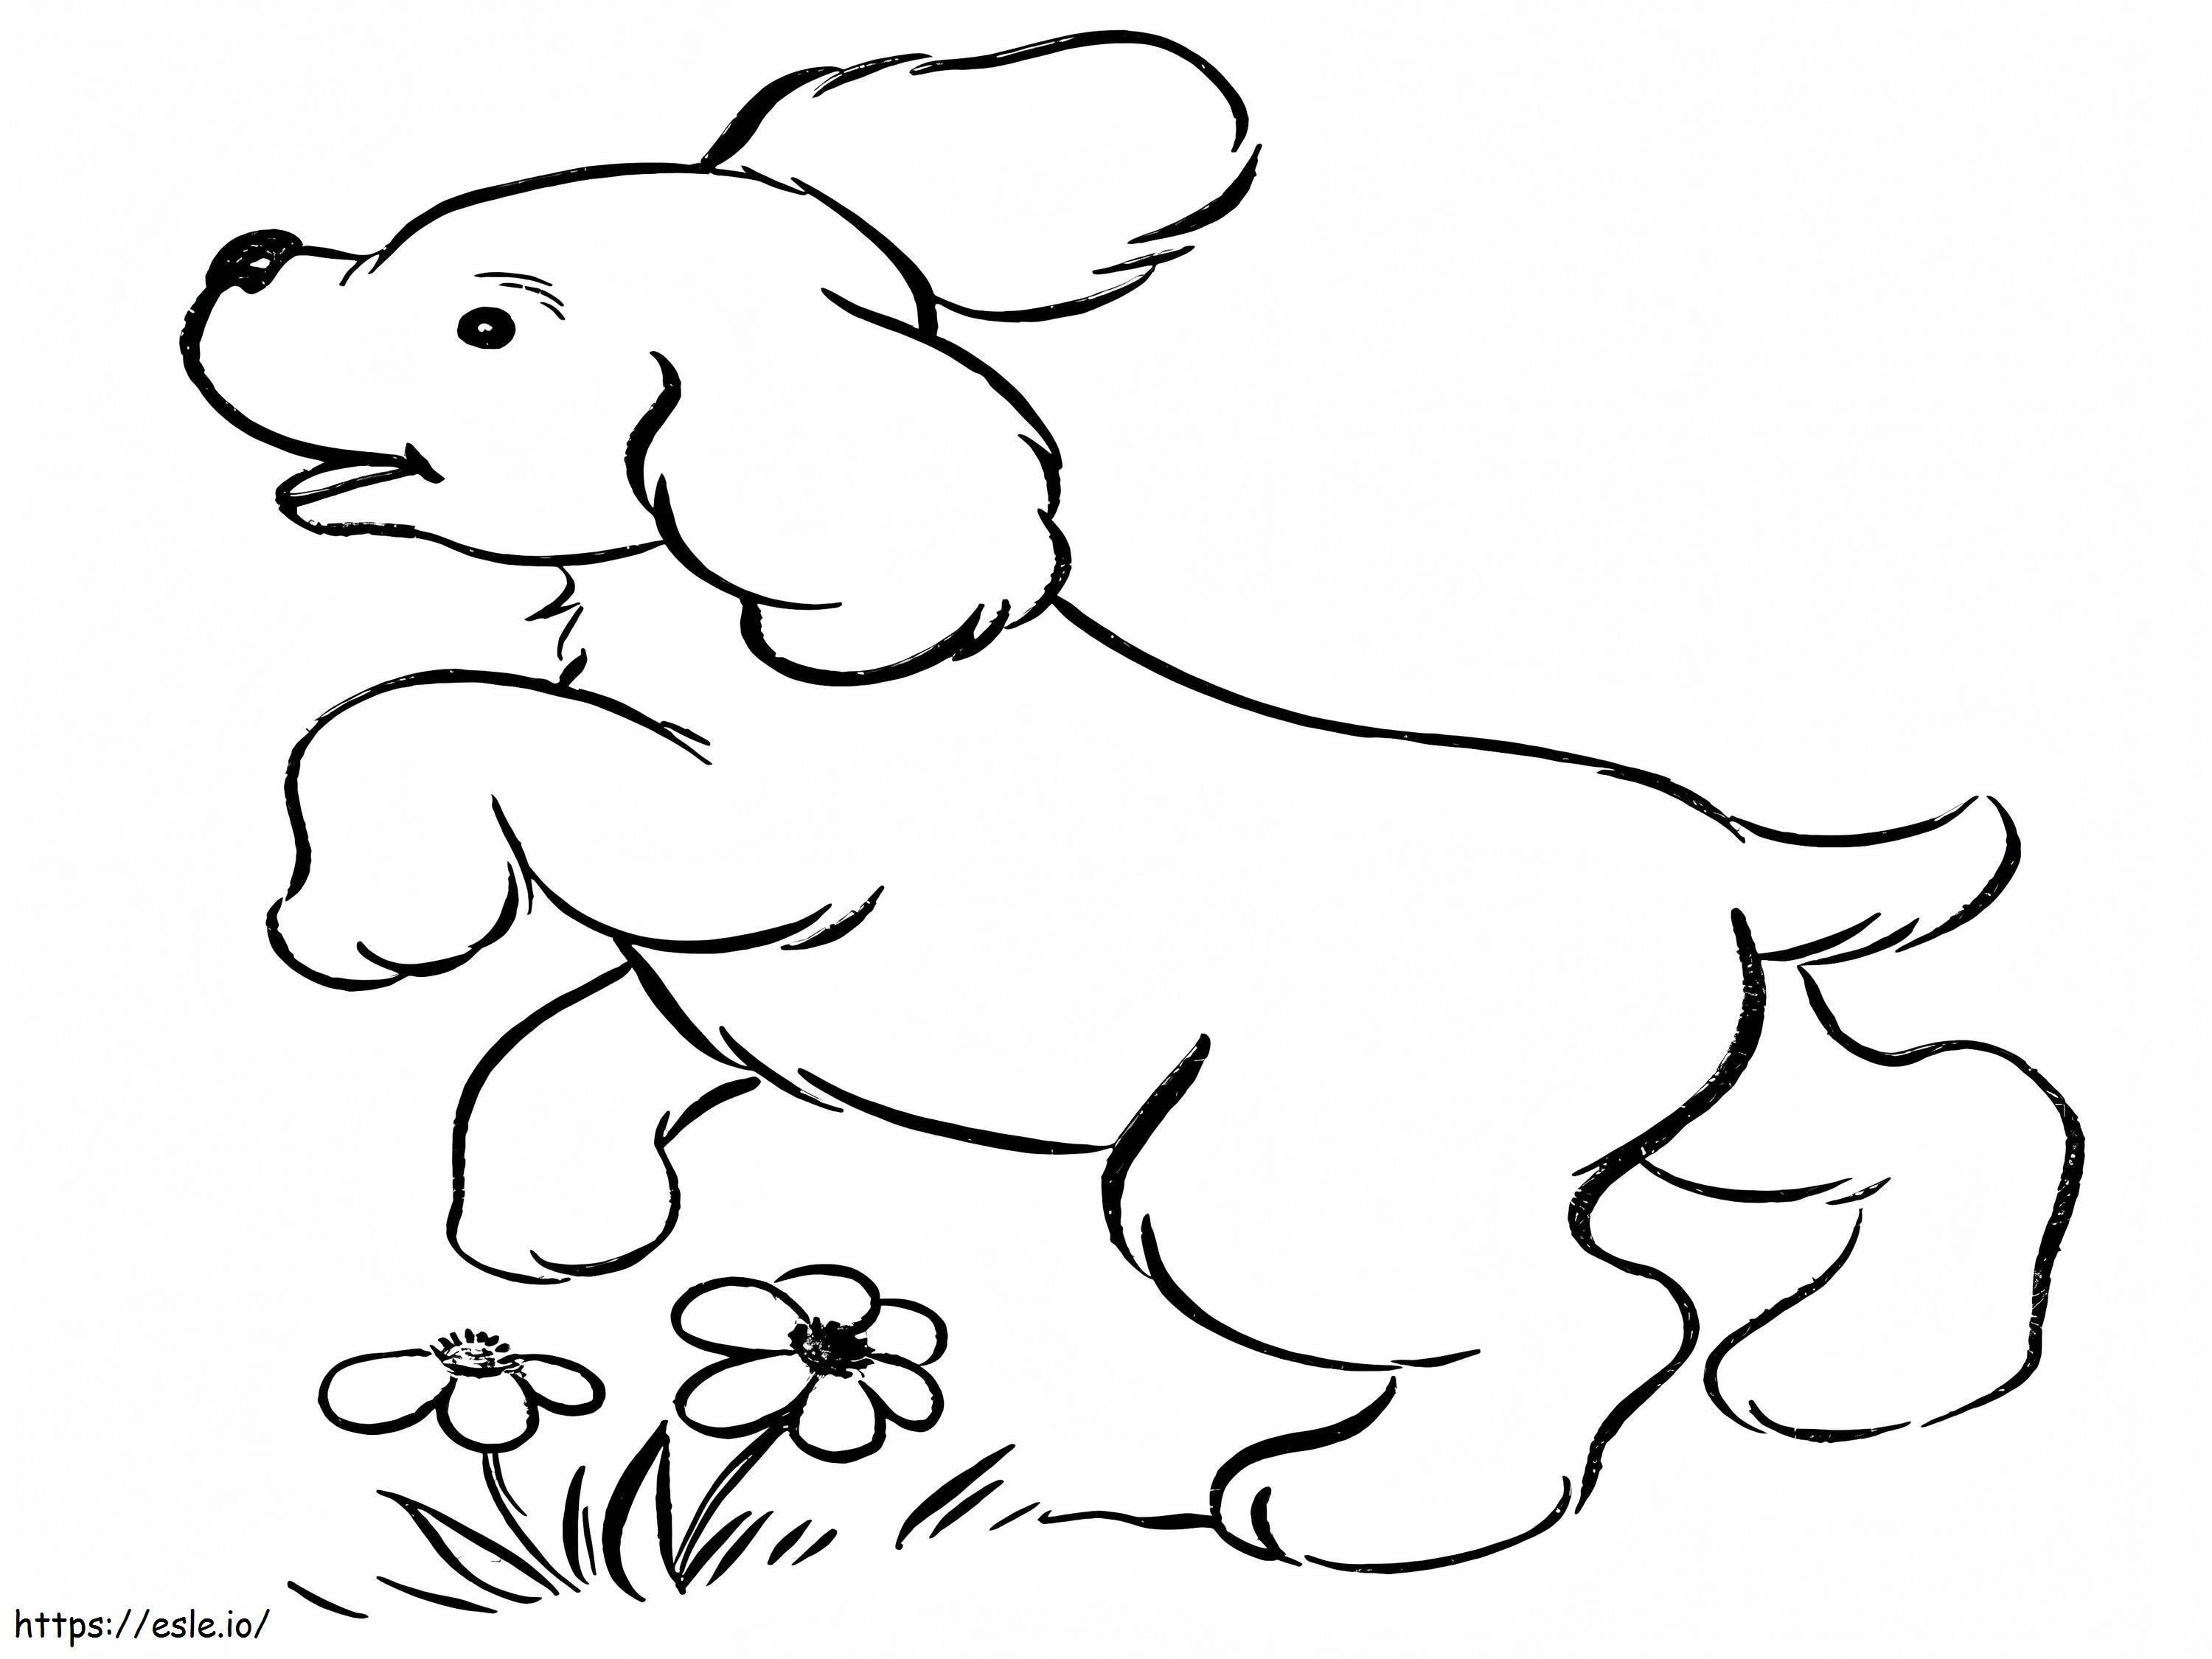 Puppy On Ground coloring page